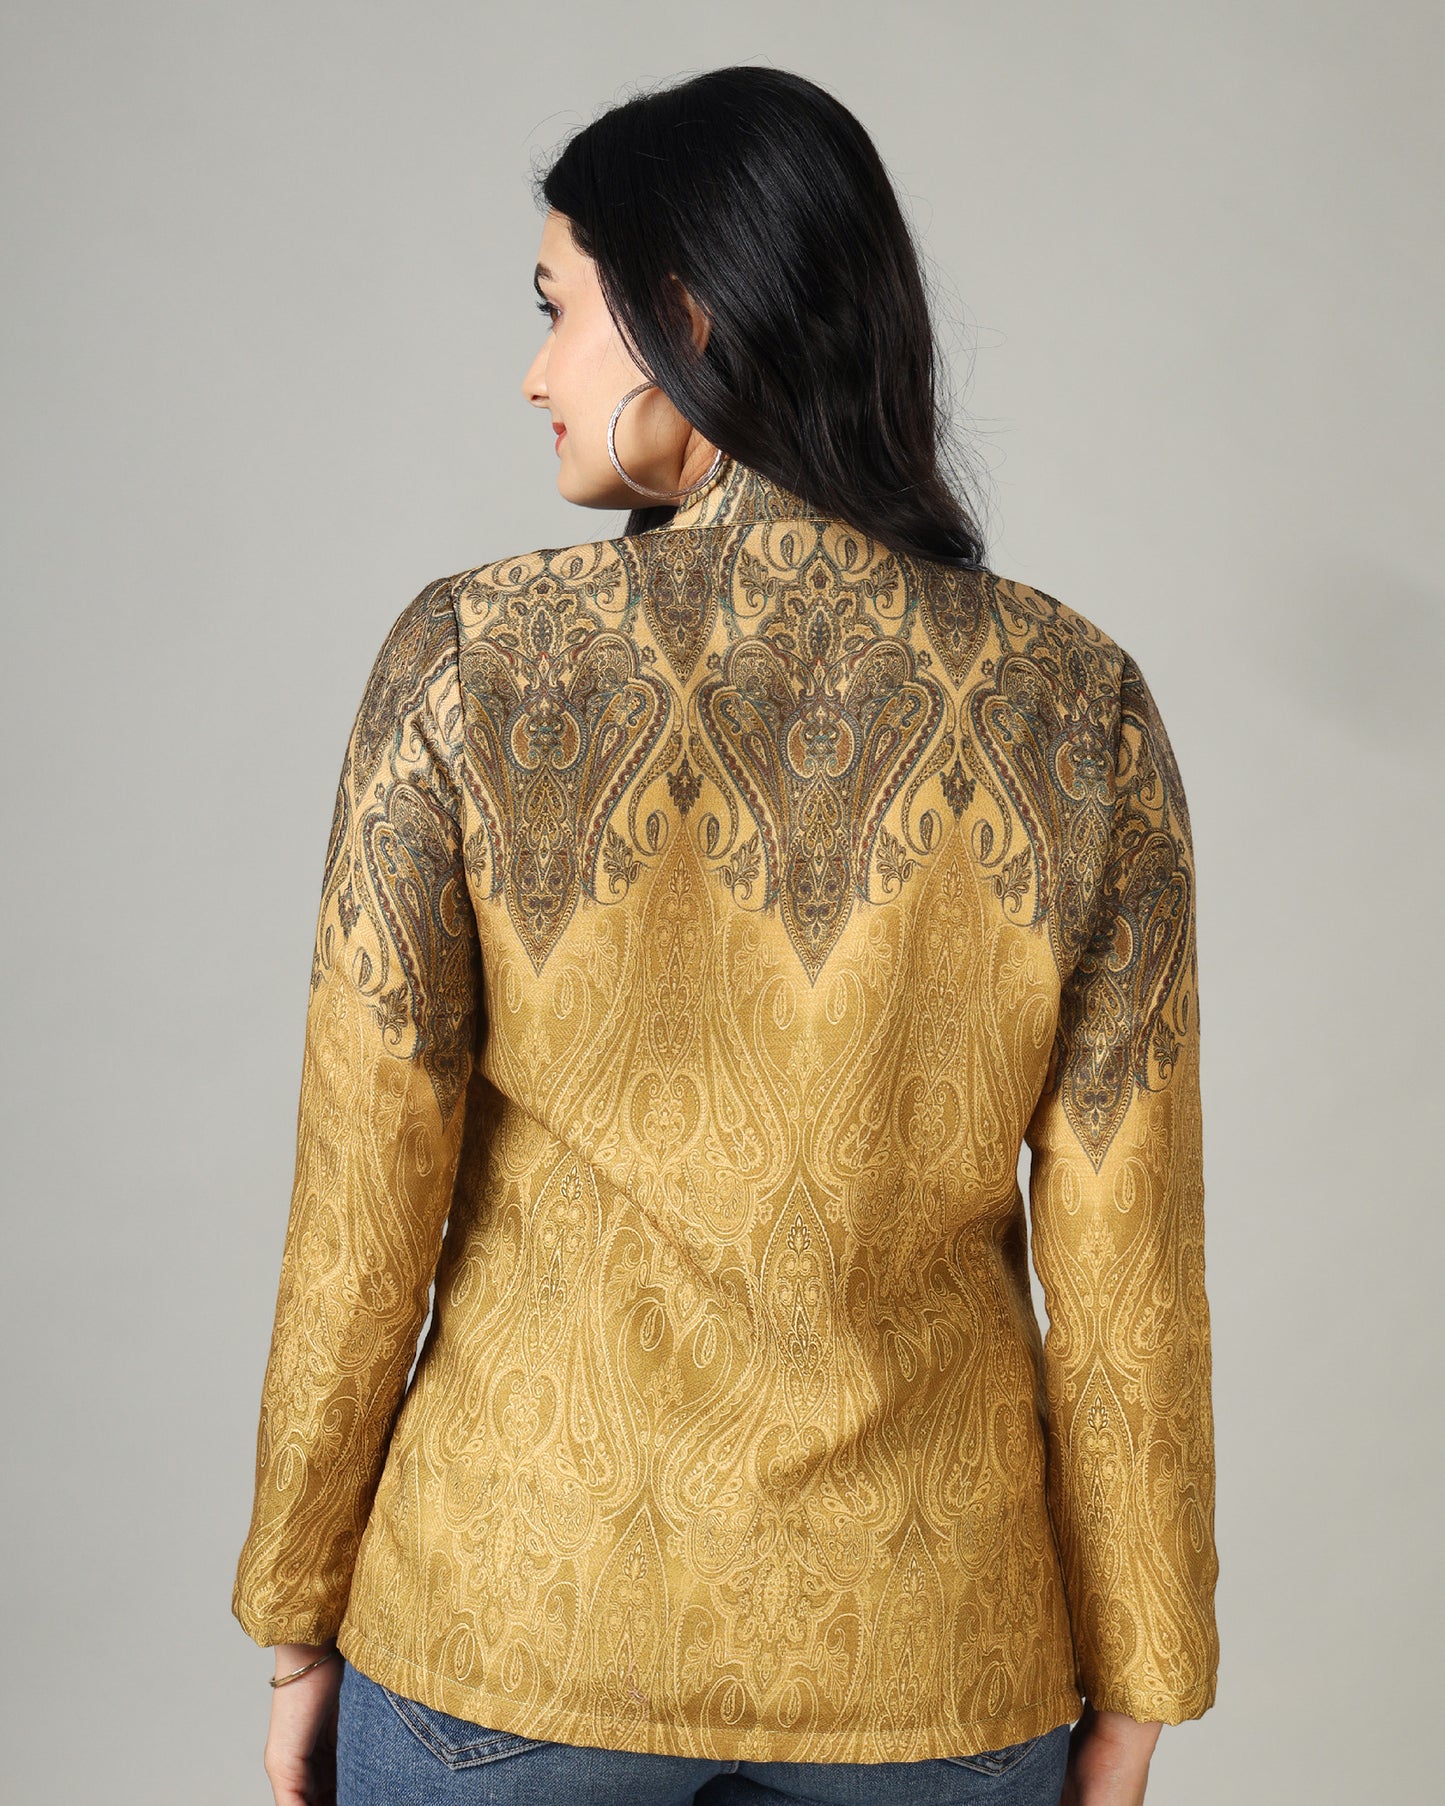 Expertly Crafted Superior Quality Ethnic Jacket